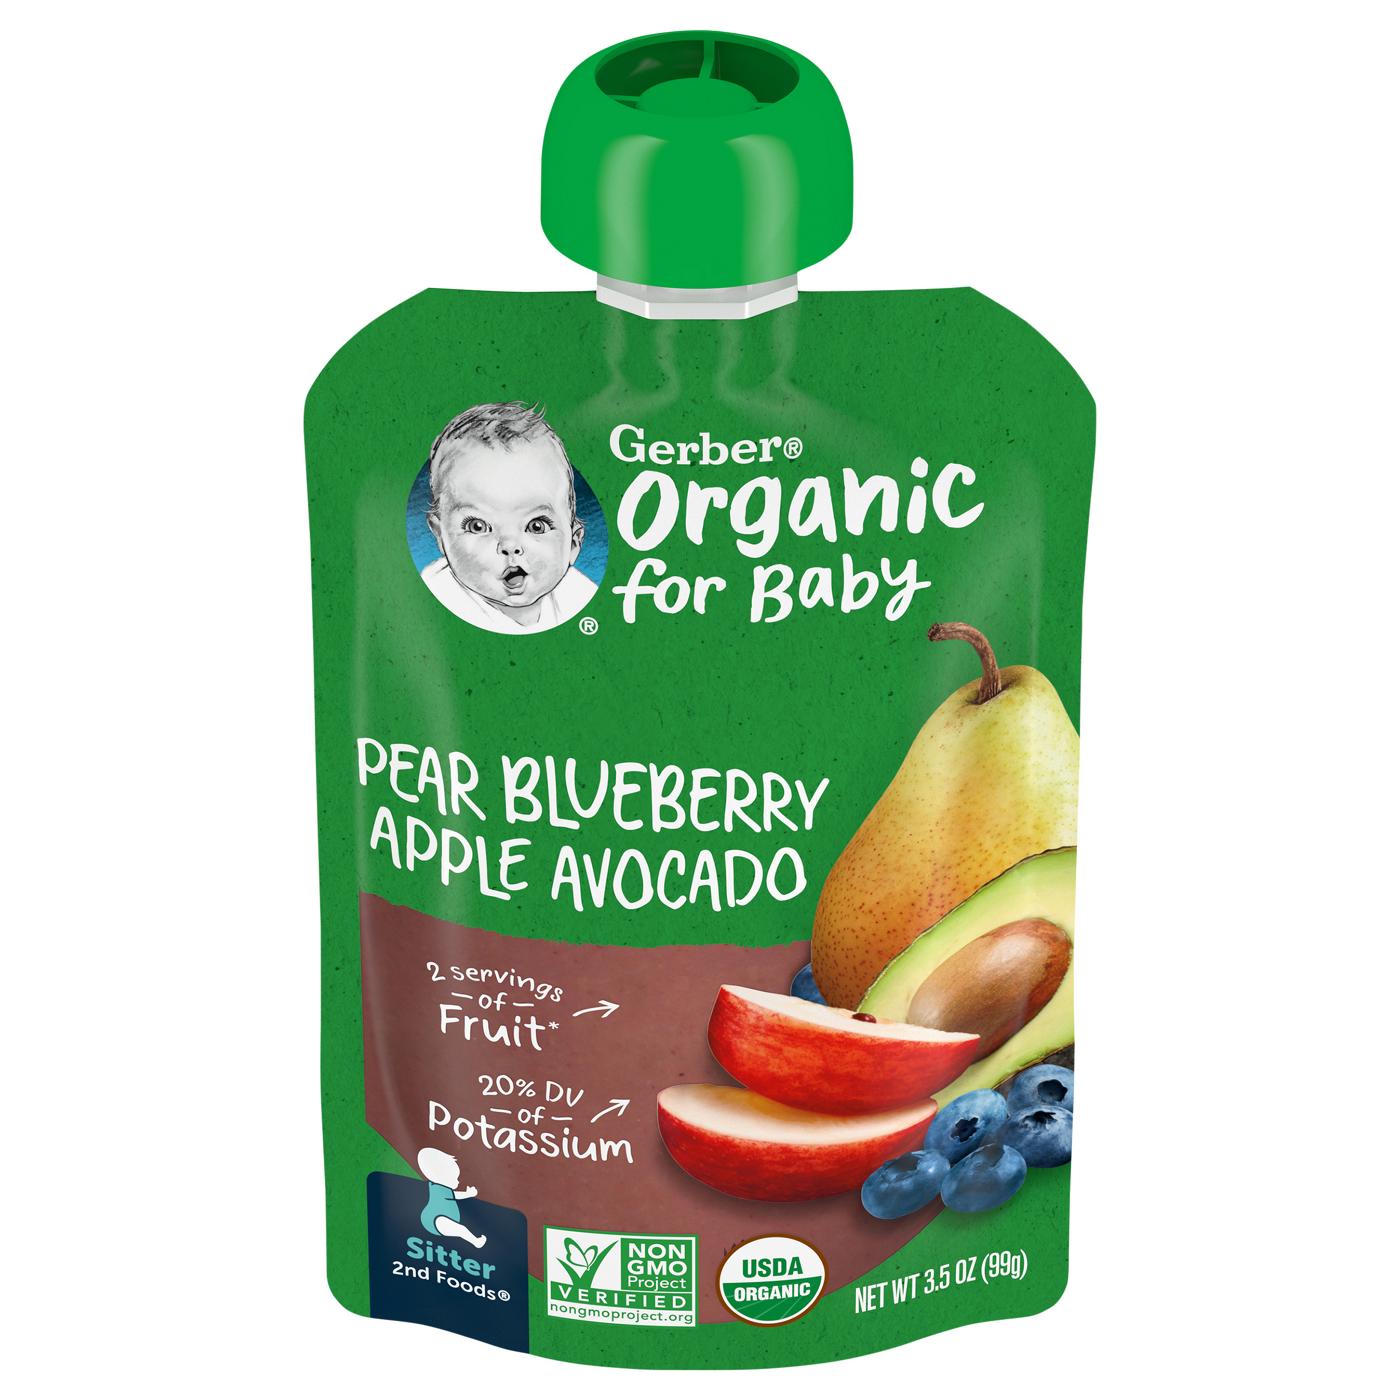 Gerber Organic for Baby Food Pouch - Pear Blueberry Apple & Avocado; image 1 of 8